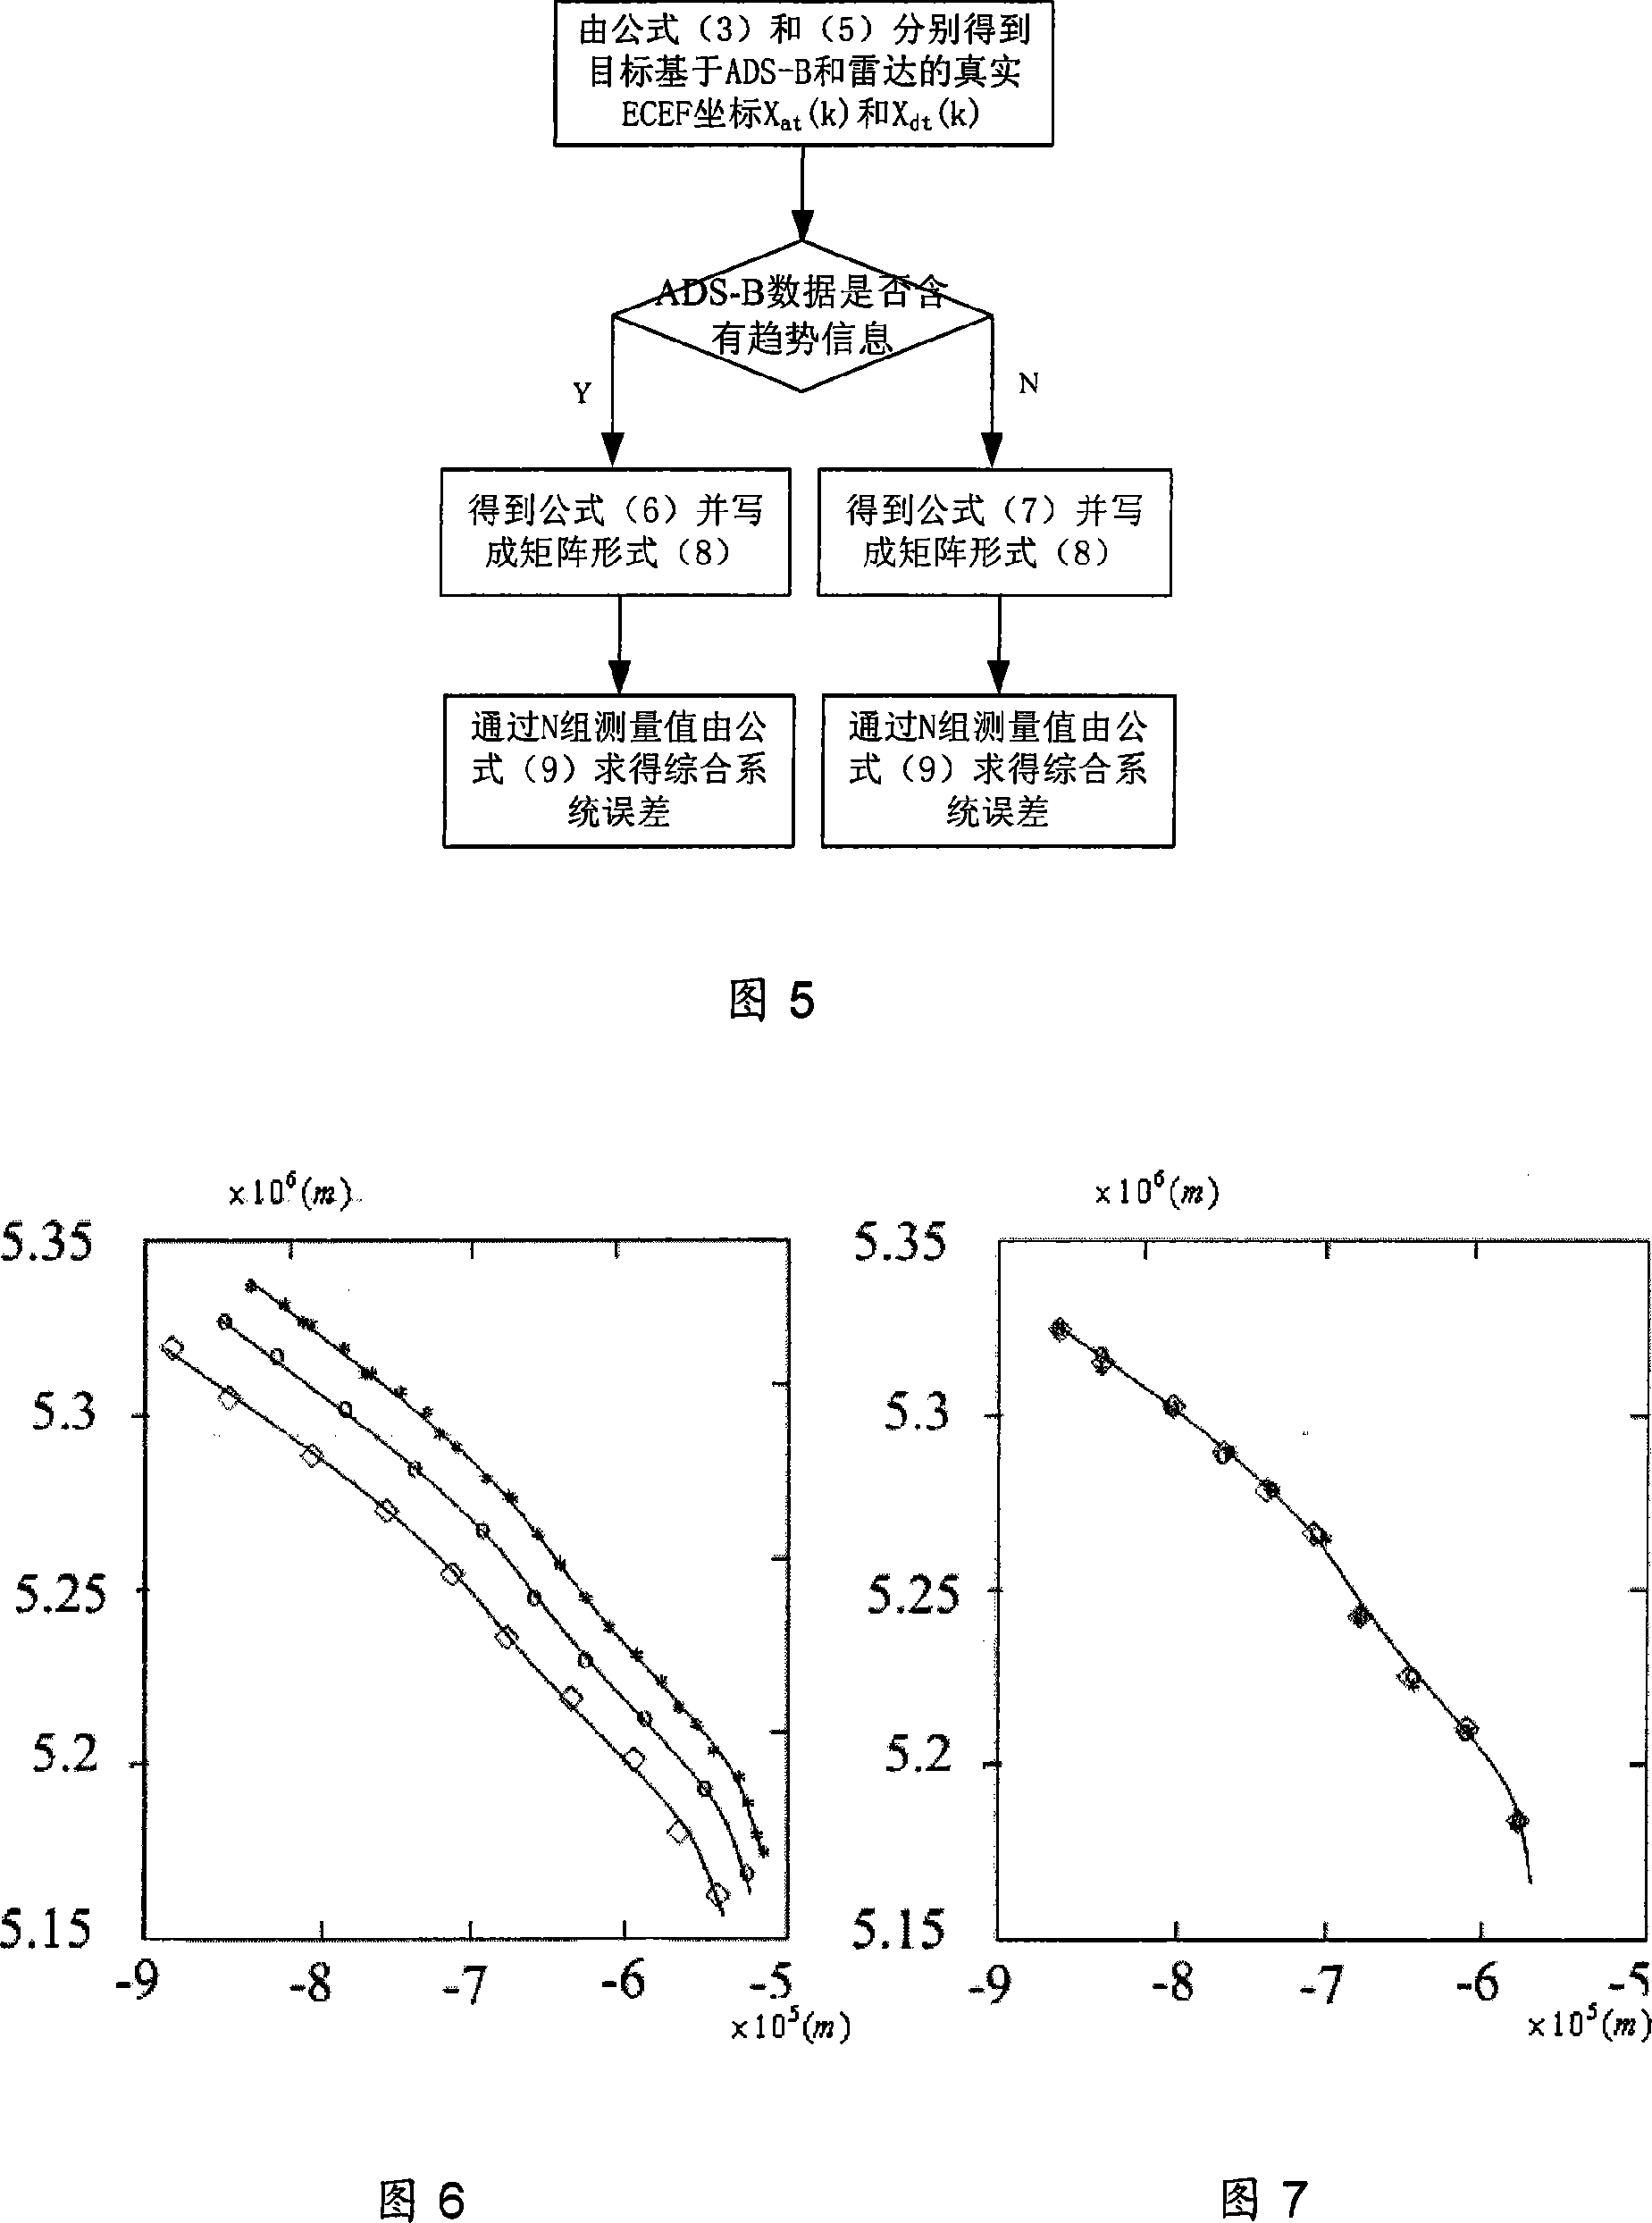 Error calibrating method for high dynamic, multivariate and asynchronous nonitoring system